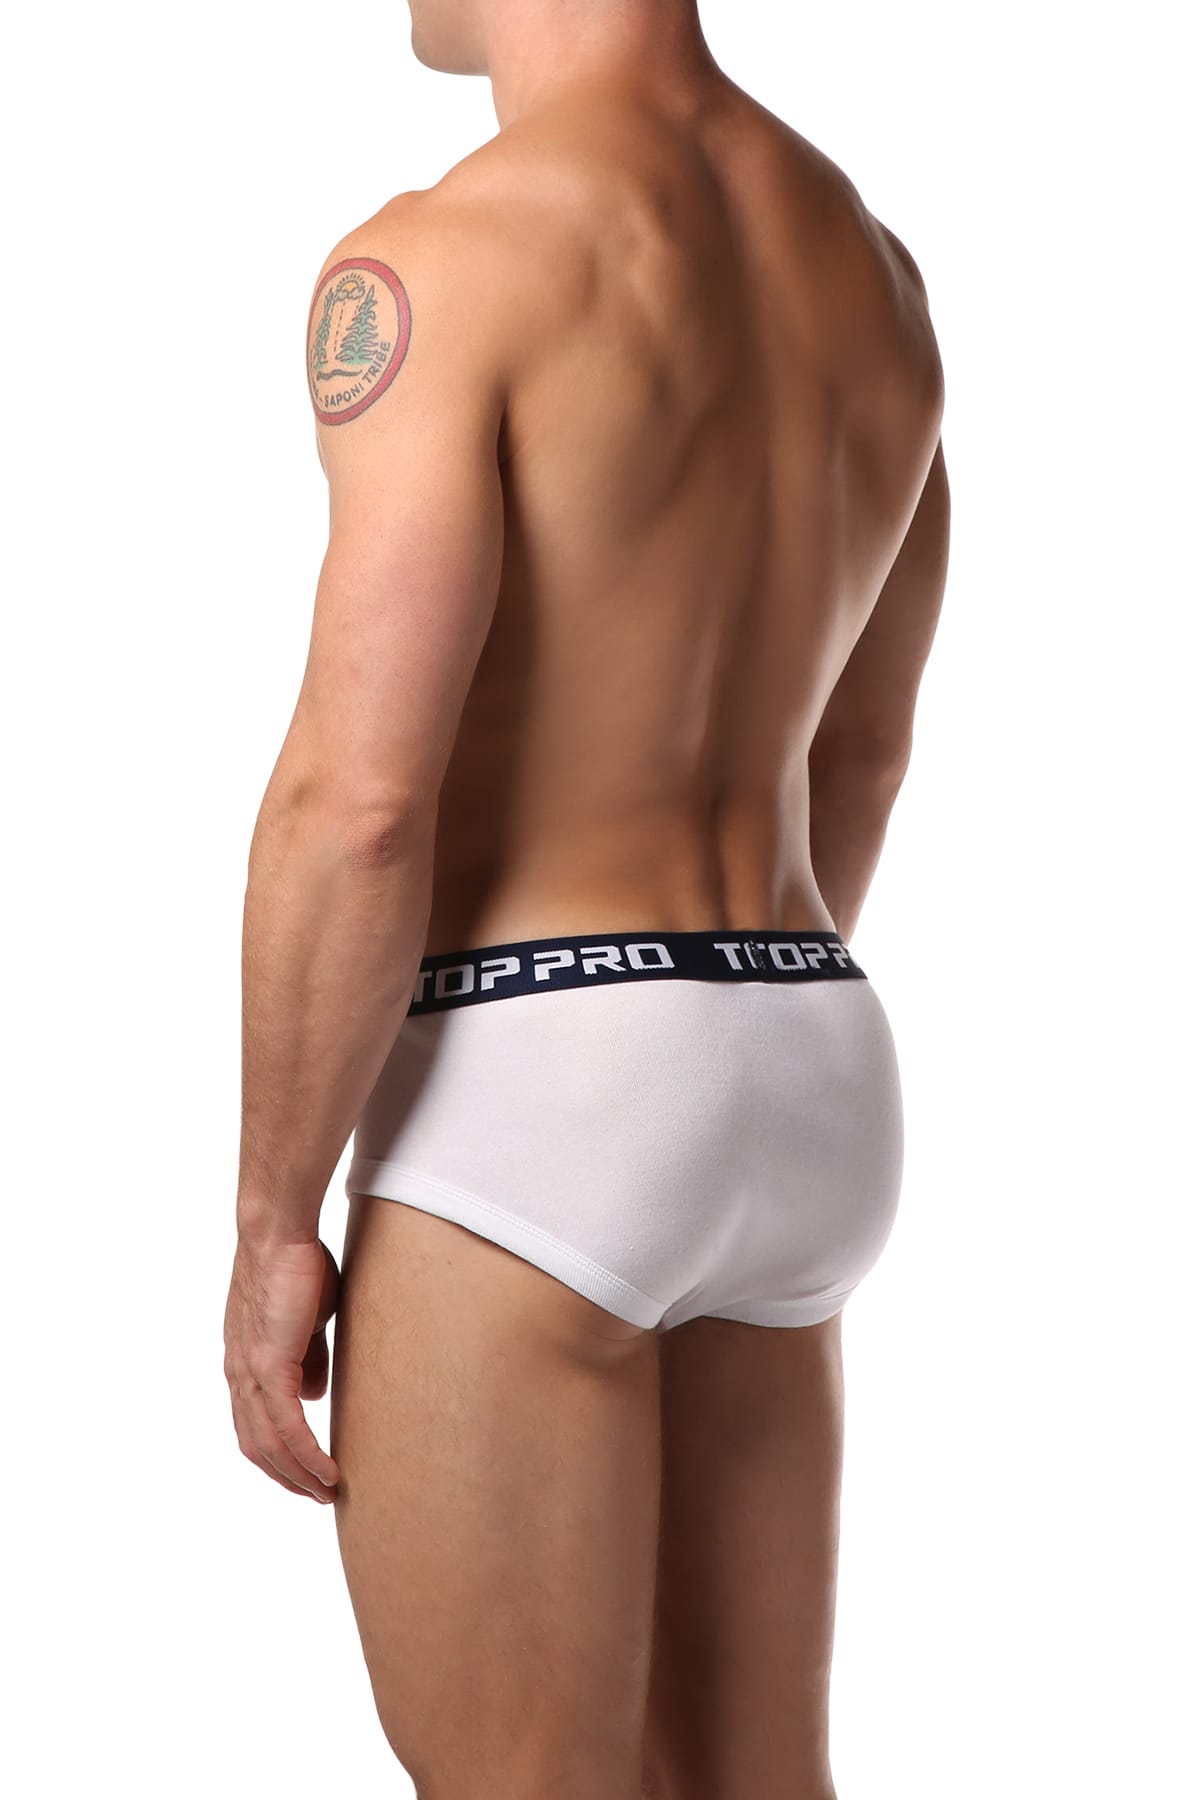 Top Pro White Brief 2-Pack